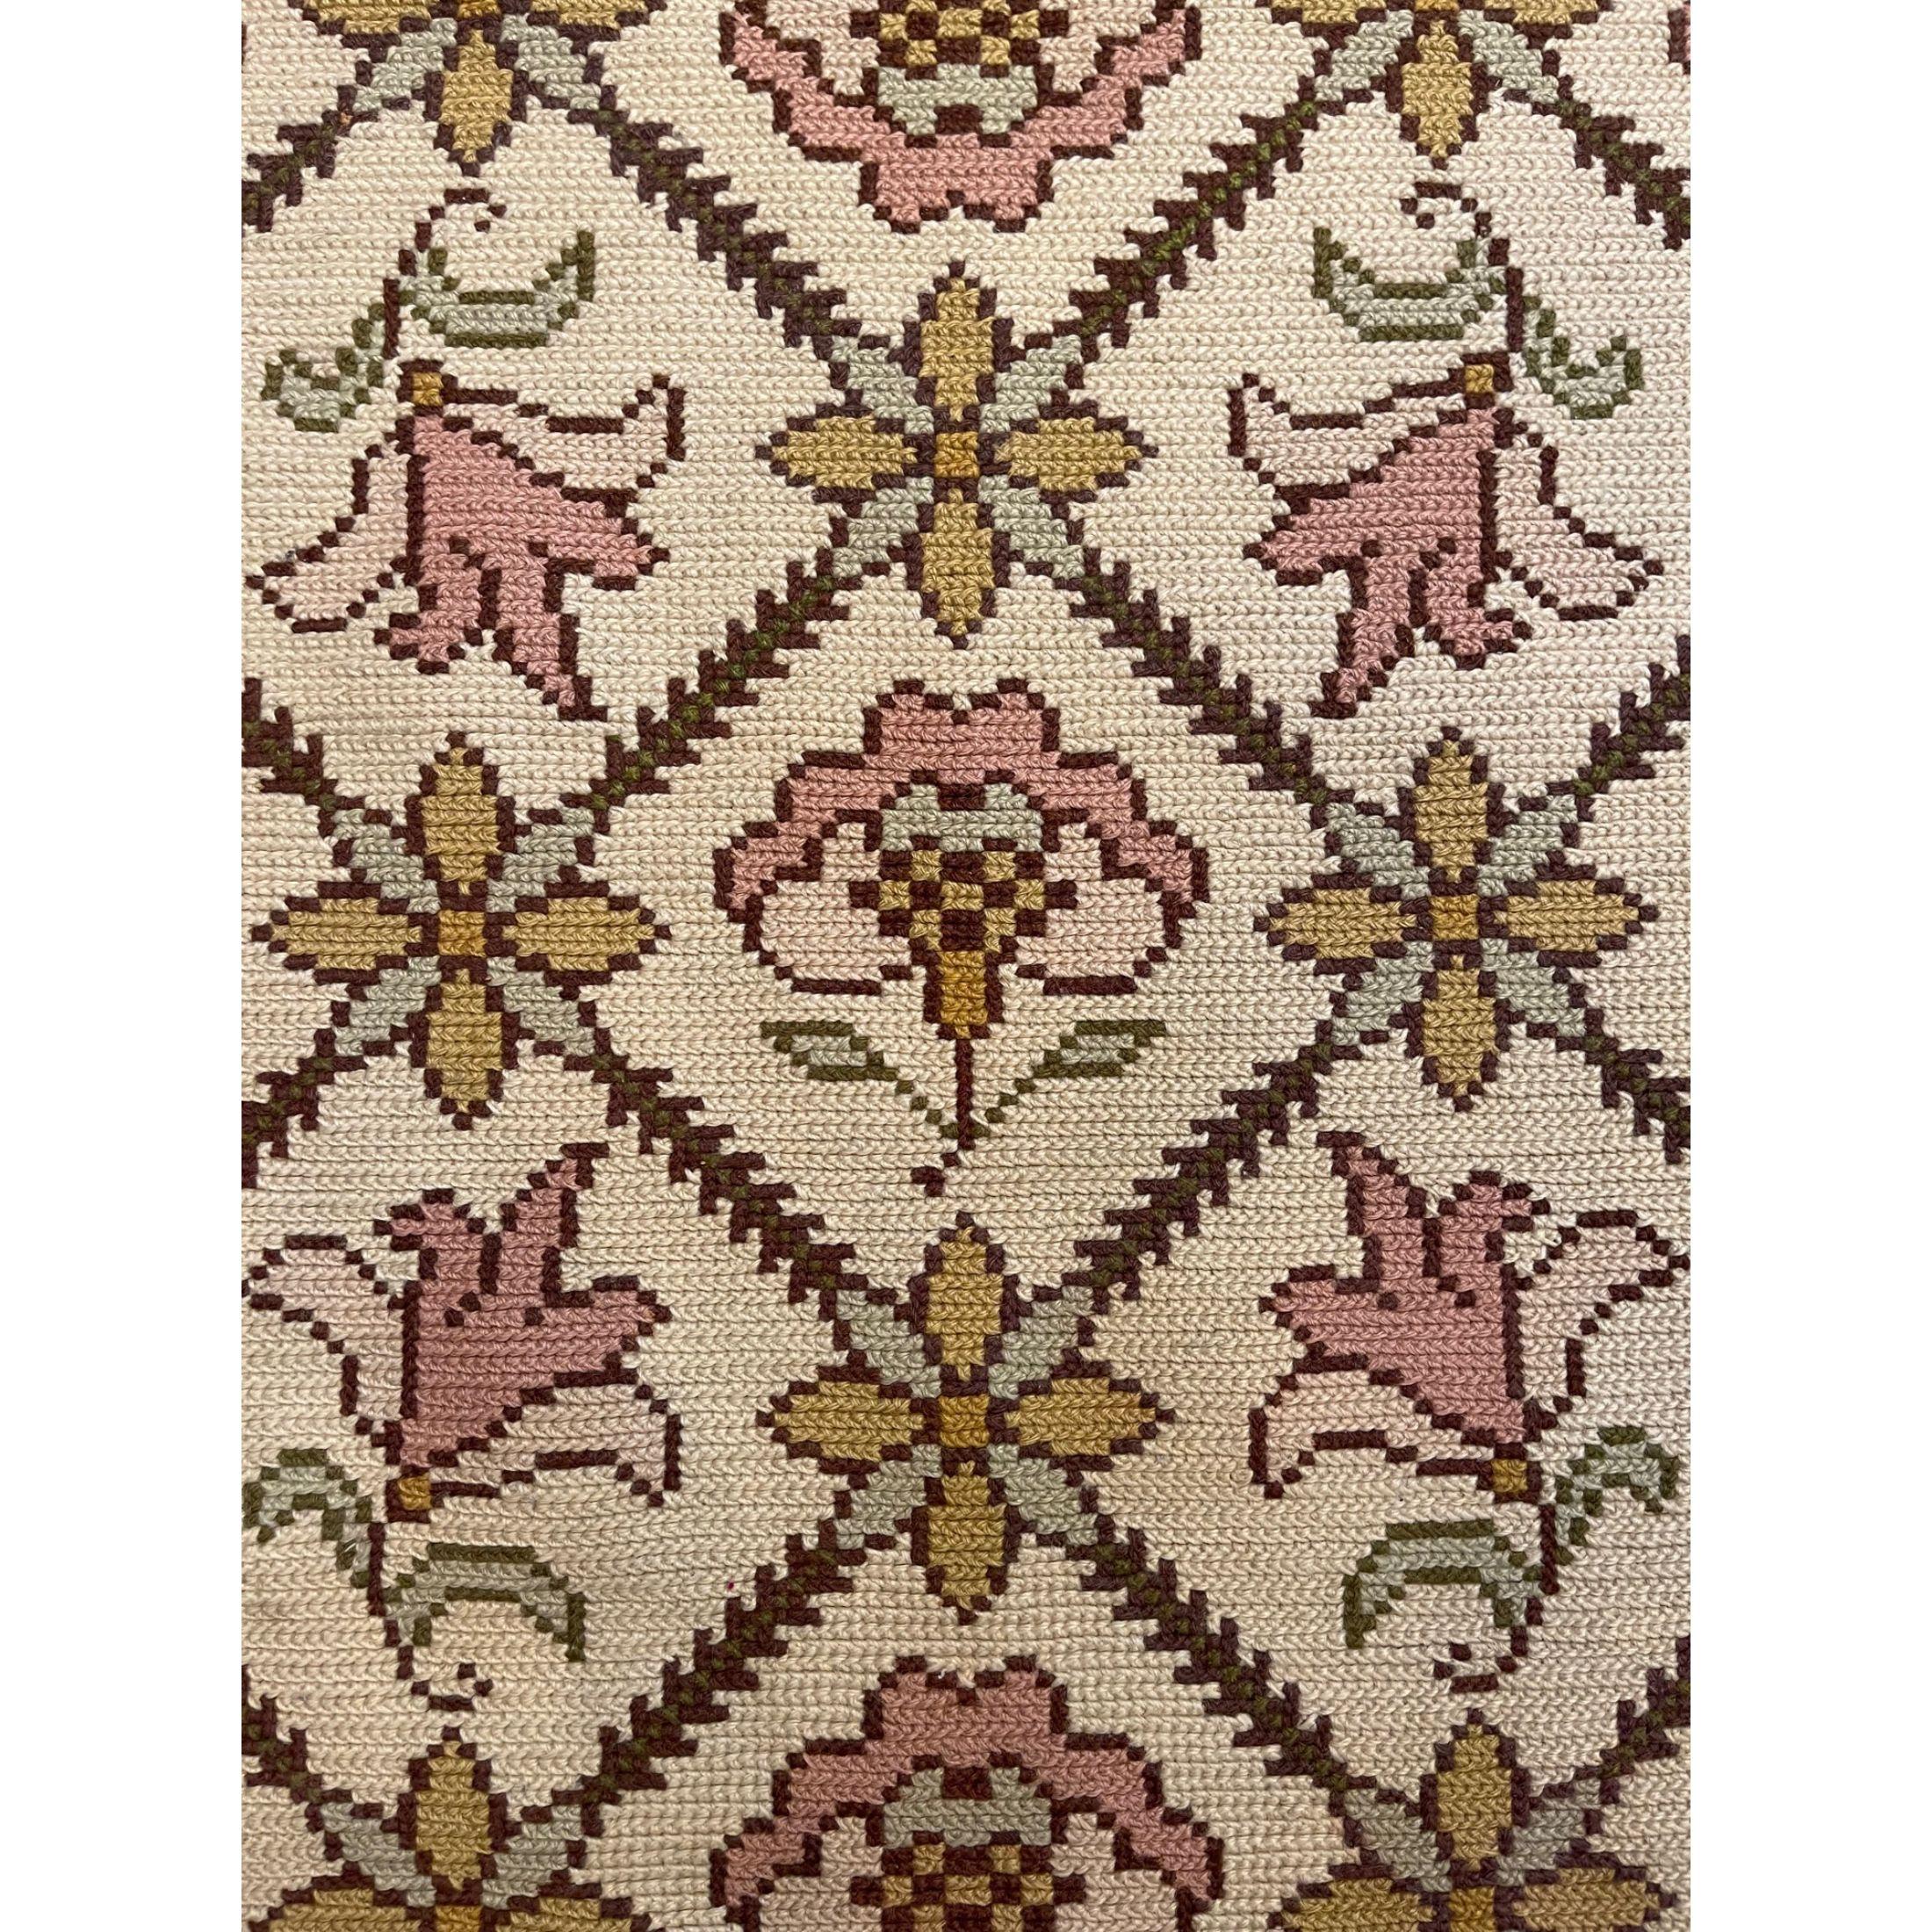 Antique Needlepoint Floral Rug In Good Condition For Sale In Los Angeles, US